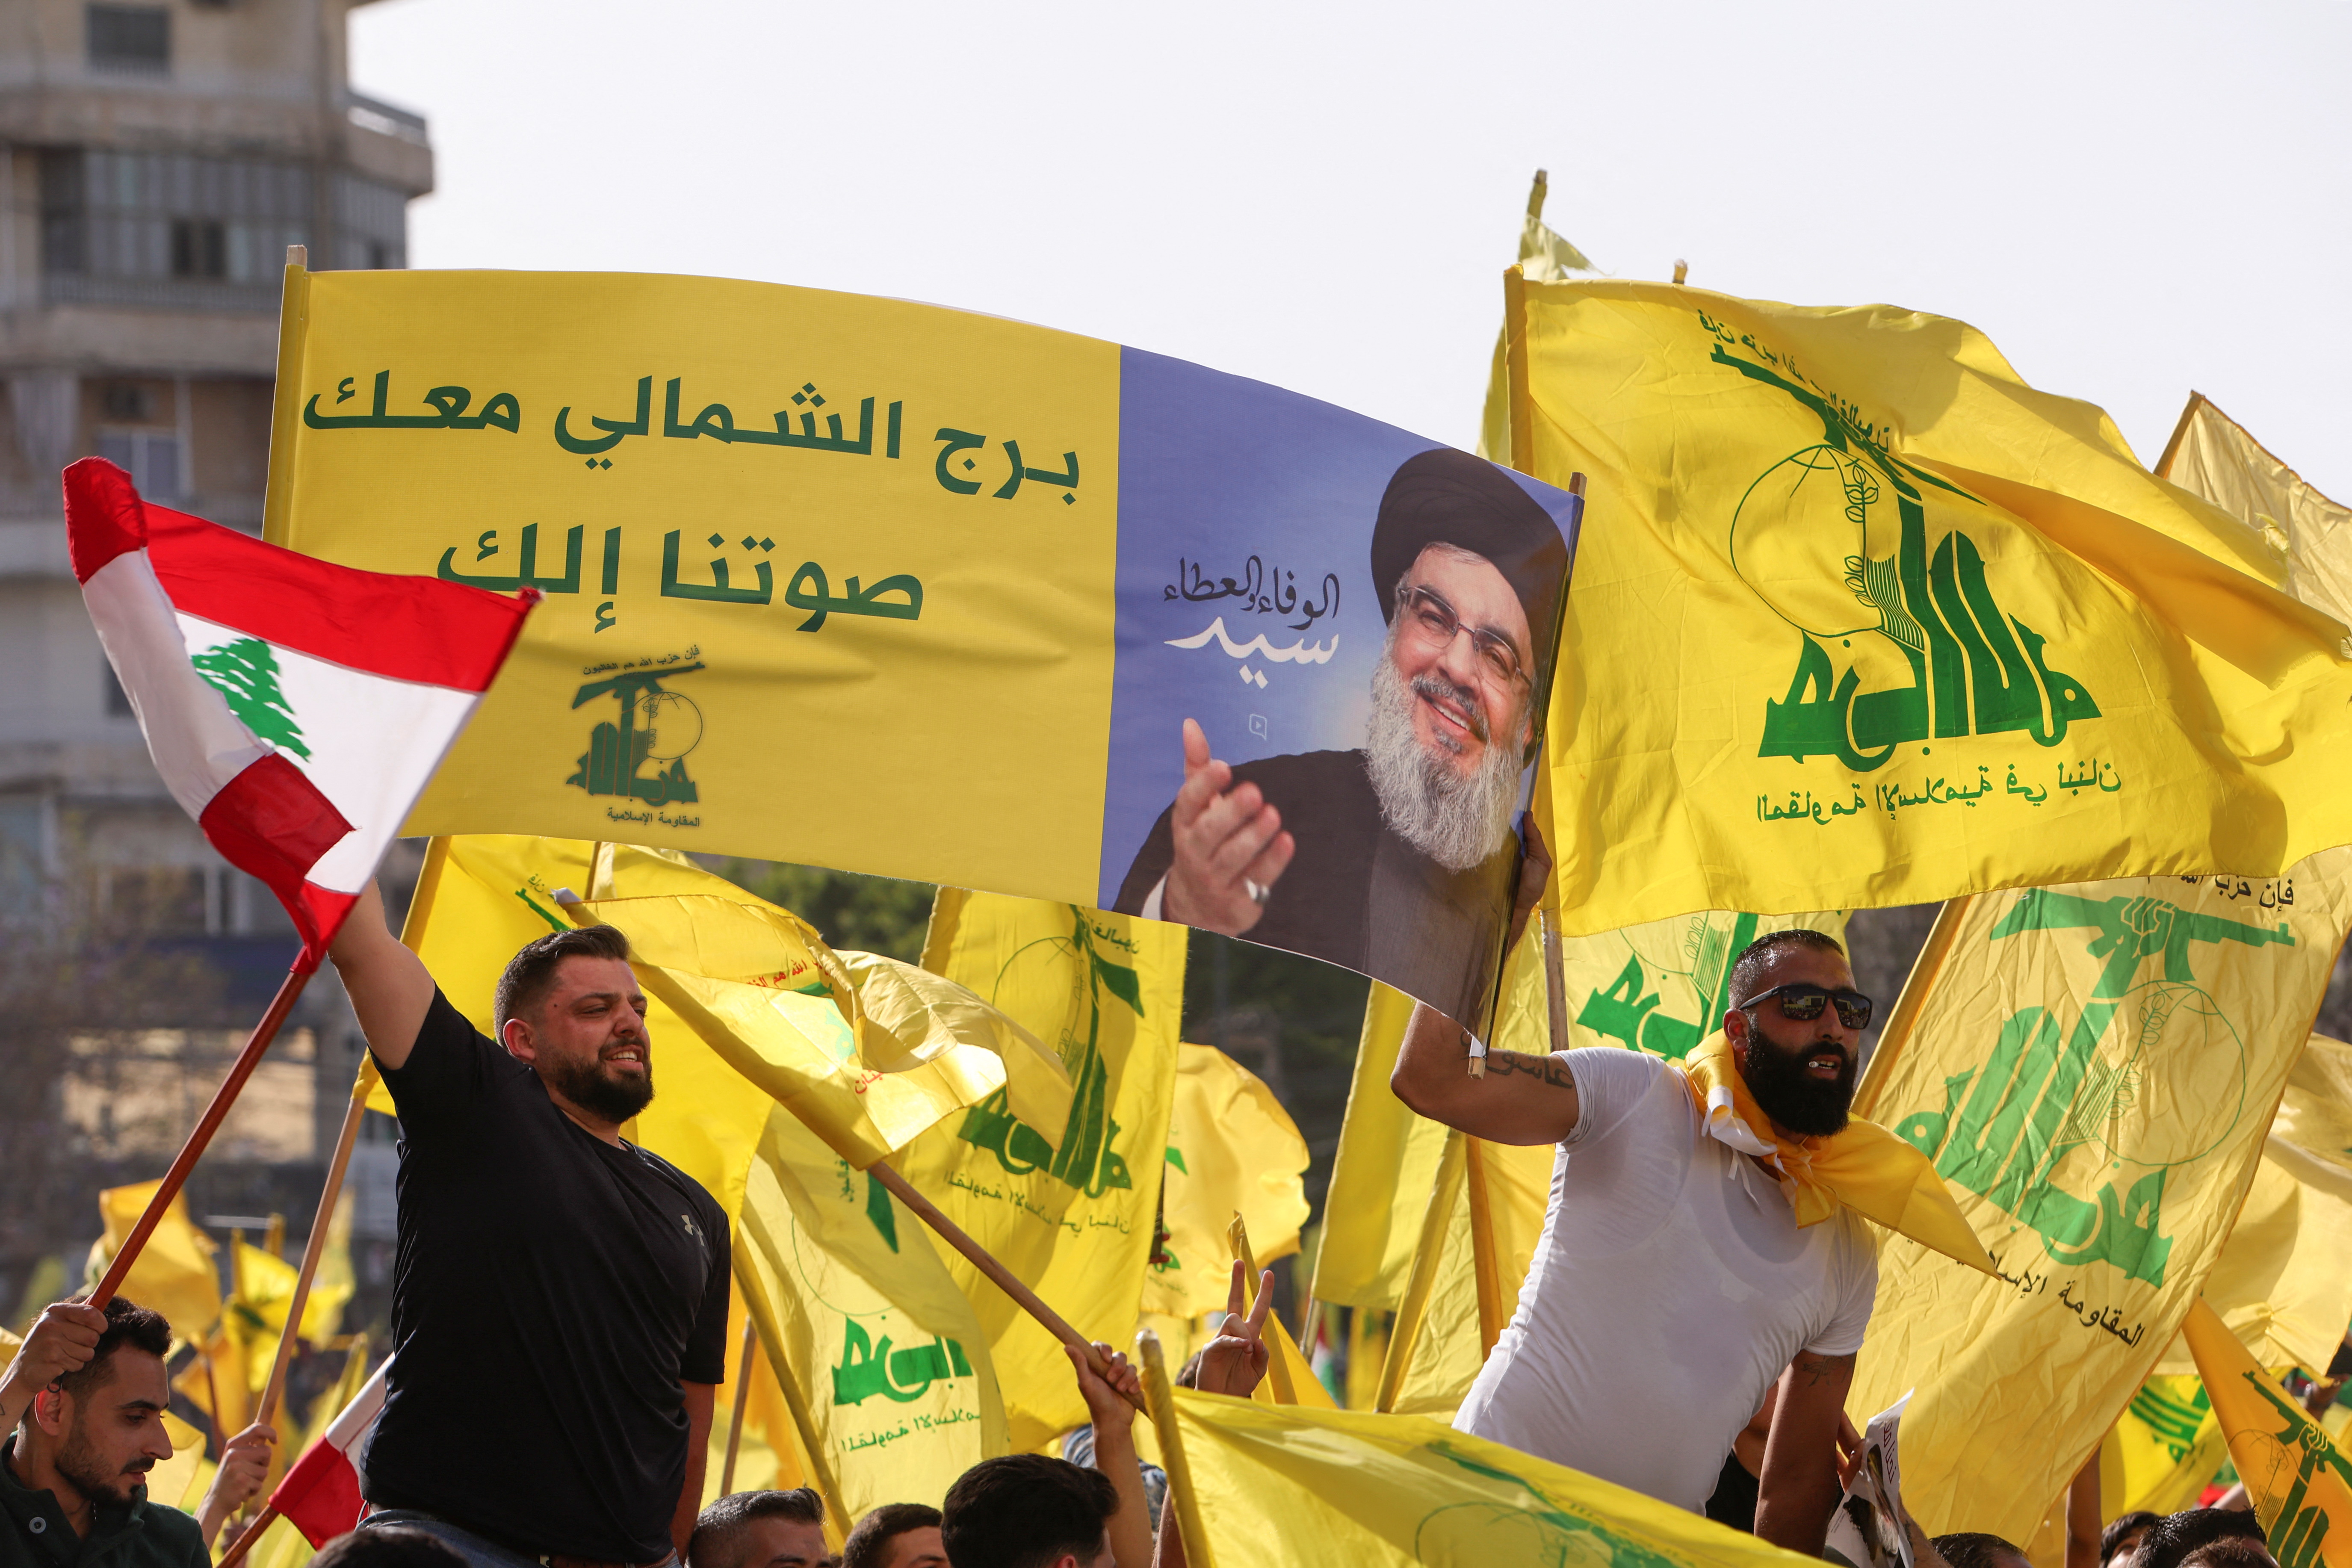 Lebanon's Hezbollah leader Nasrallah addresses supporters at election rally in Tyre